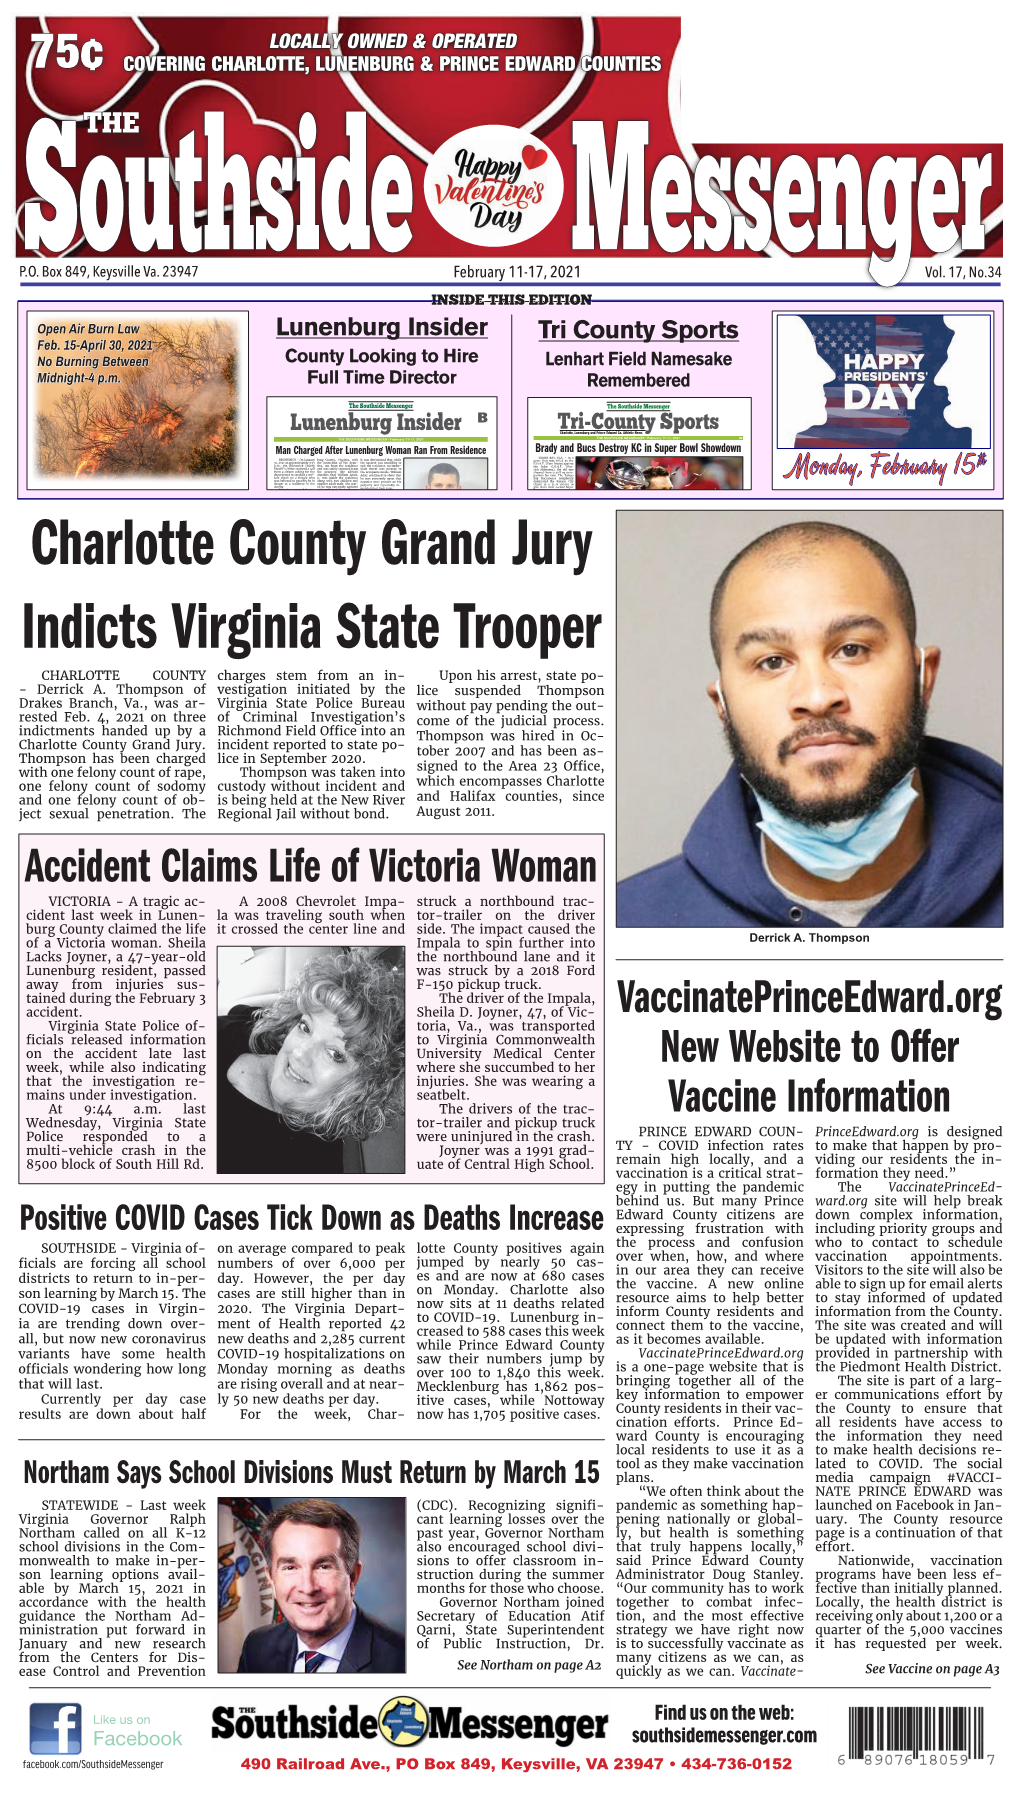 Charlotte County Grand Jury Indicts Virginia State Trooper